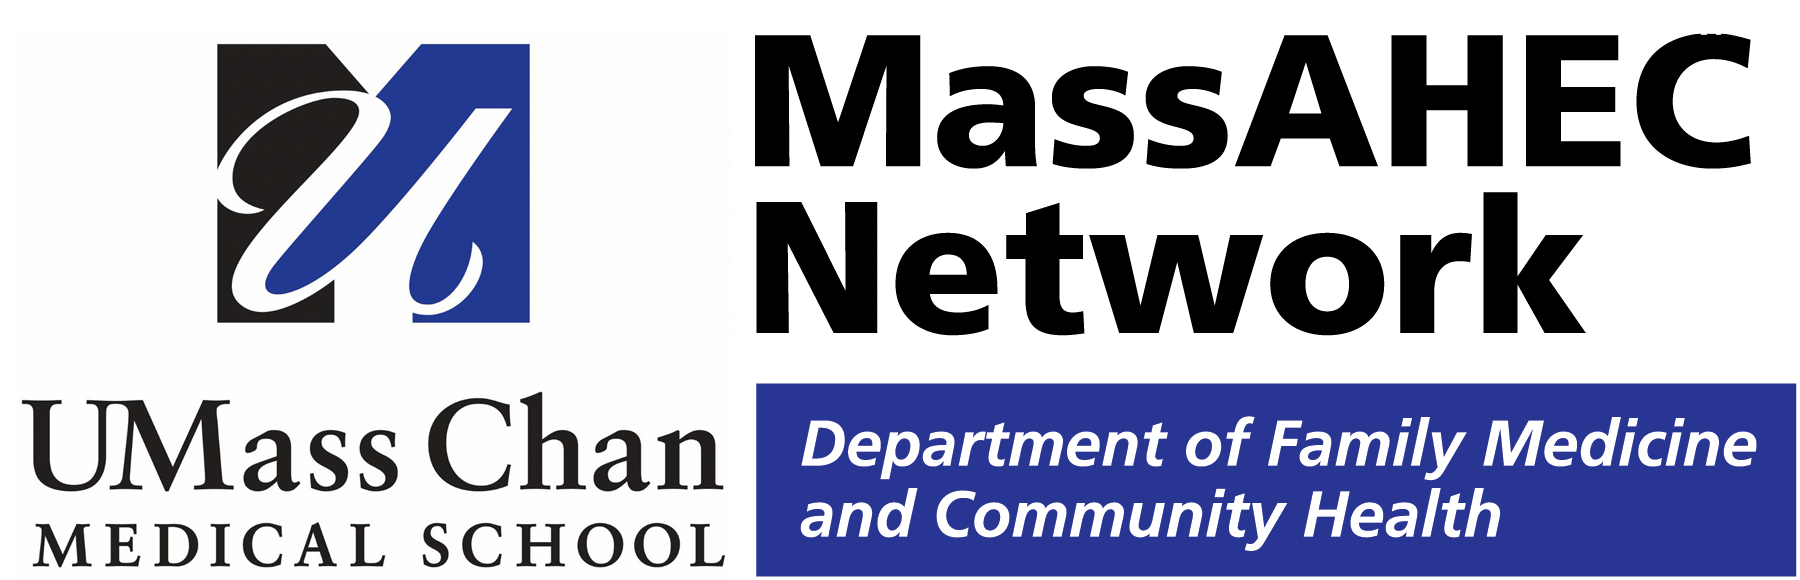 This is the logo for the UMass Chan Medical School.